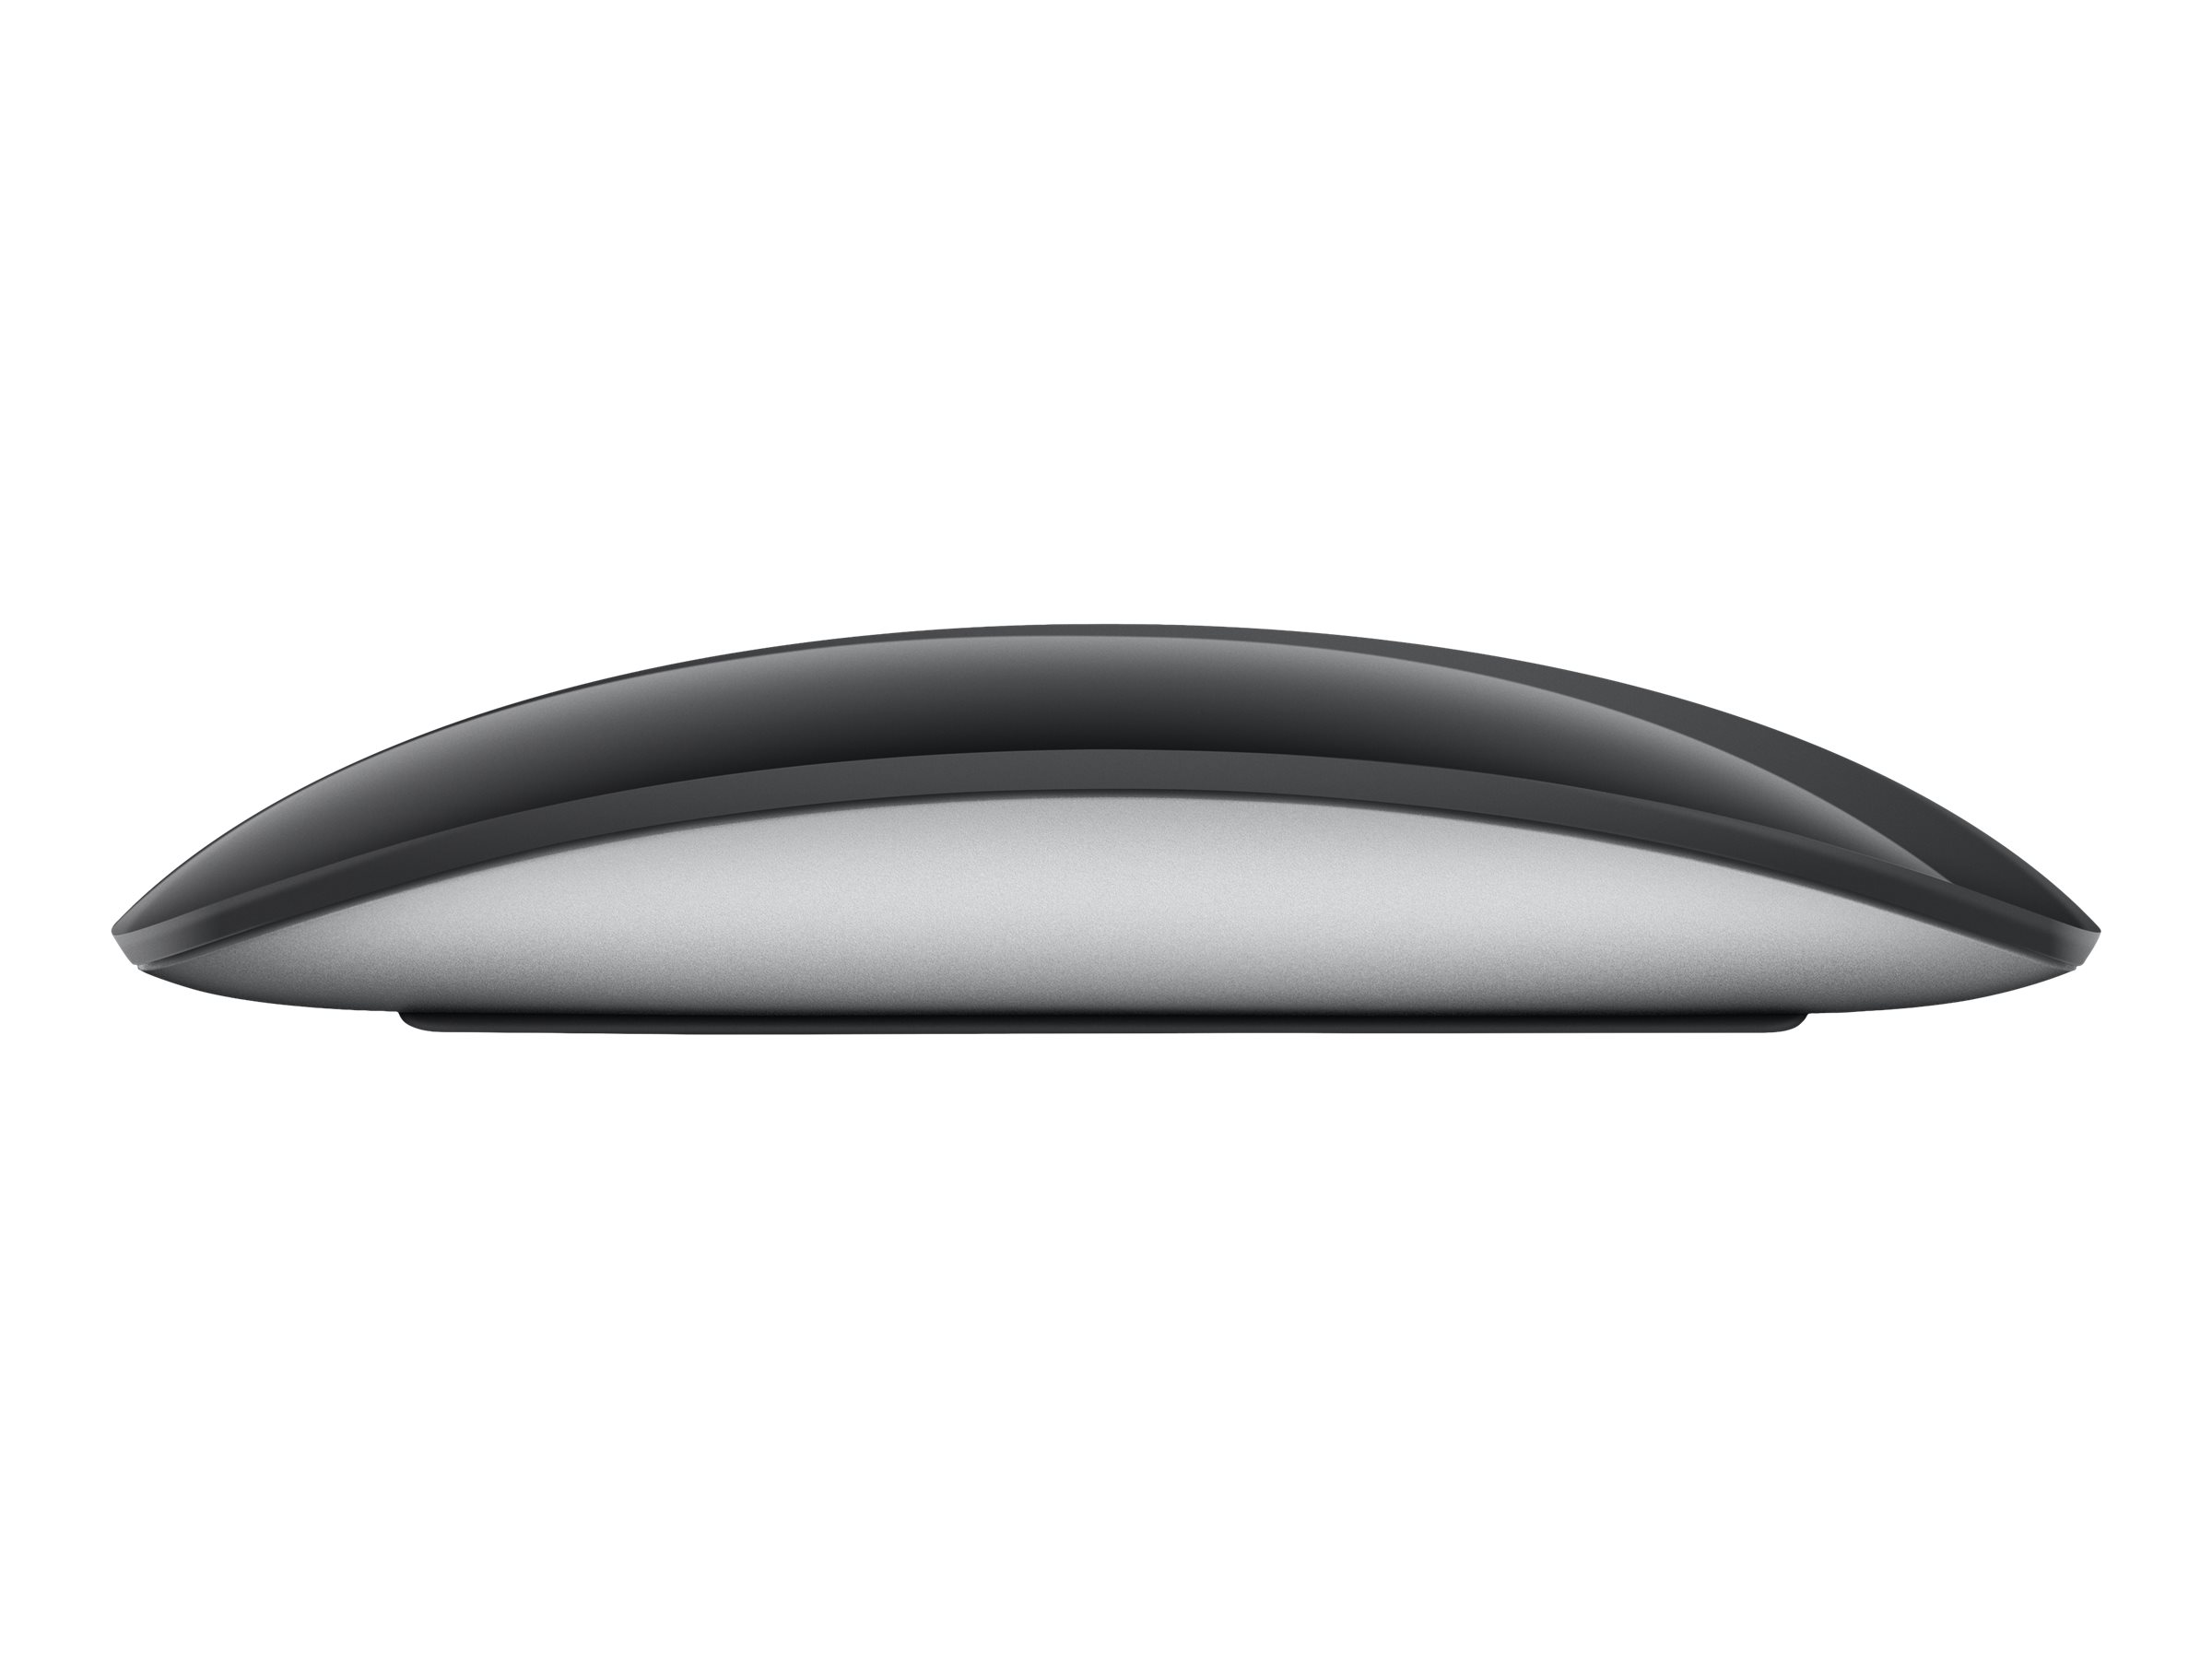 Magic Mouse black multi touch surface